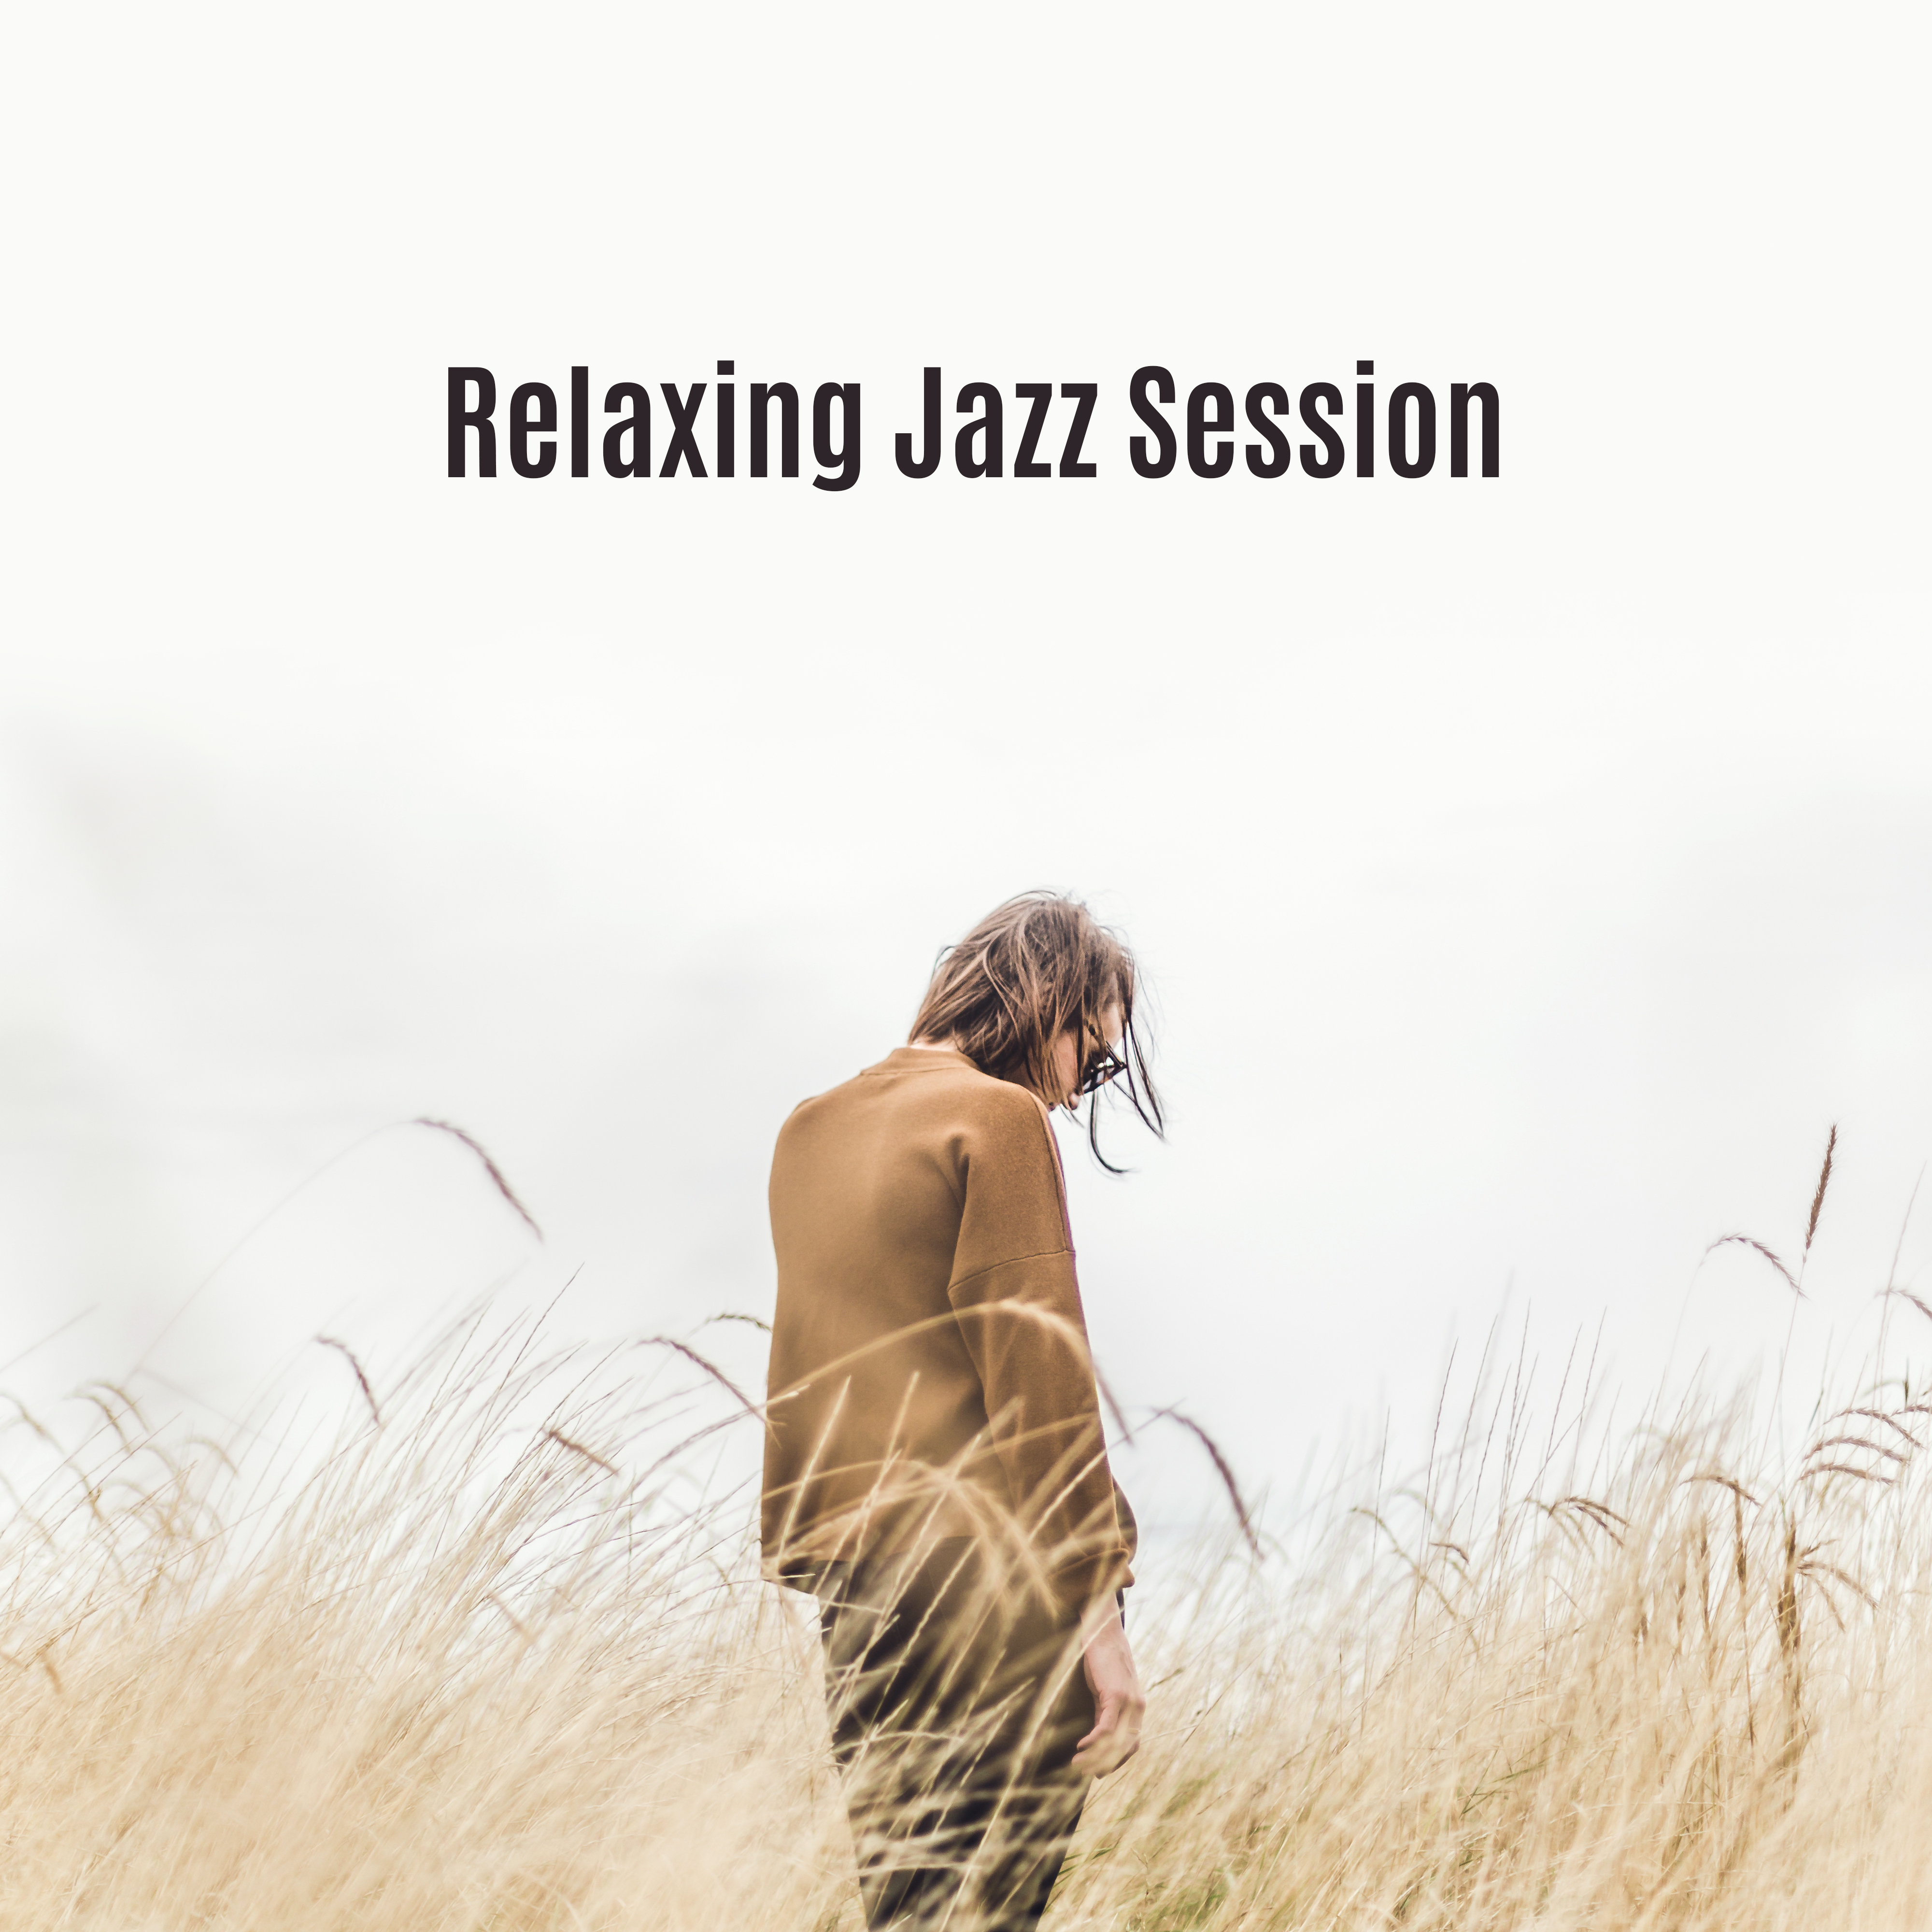 Relaxing Jazz Session – Smooth Piano Jazz, Rest in Restaurant, Coffee Time, Soft Music